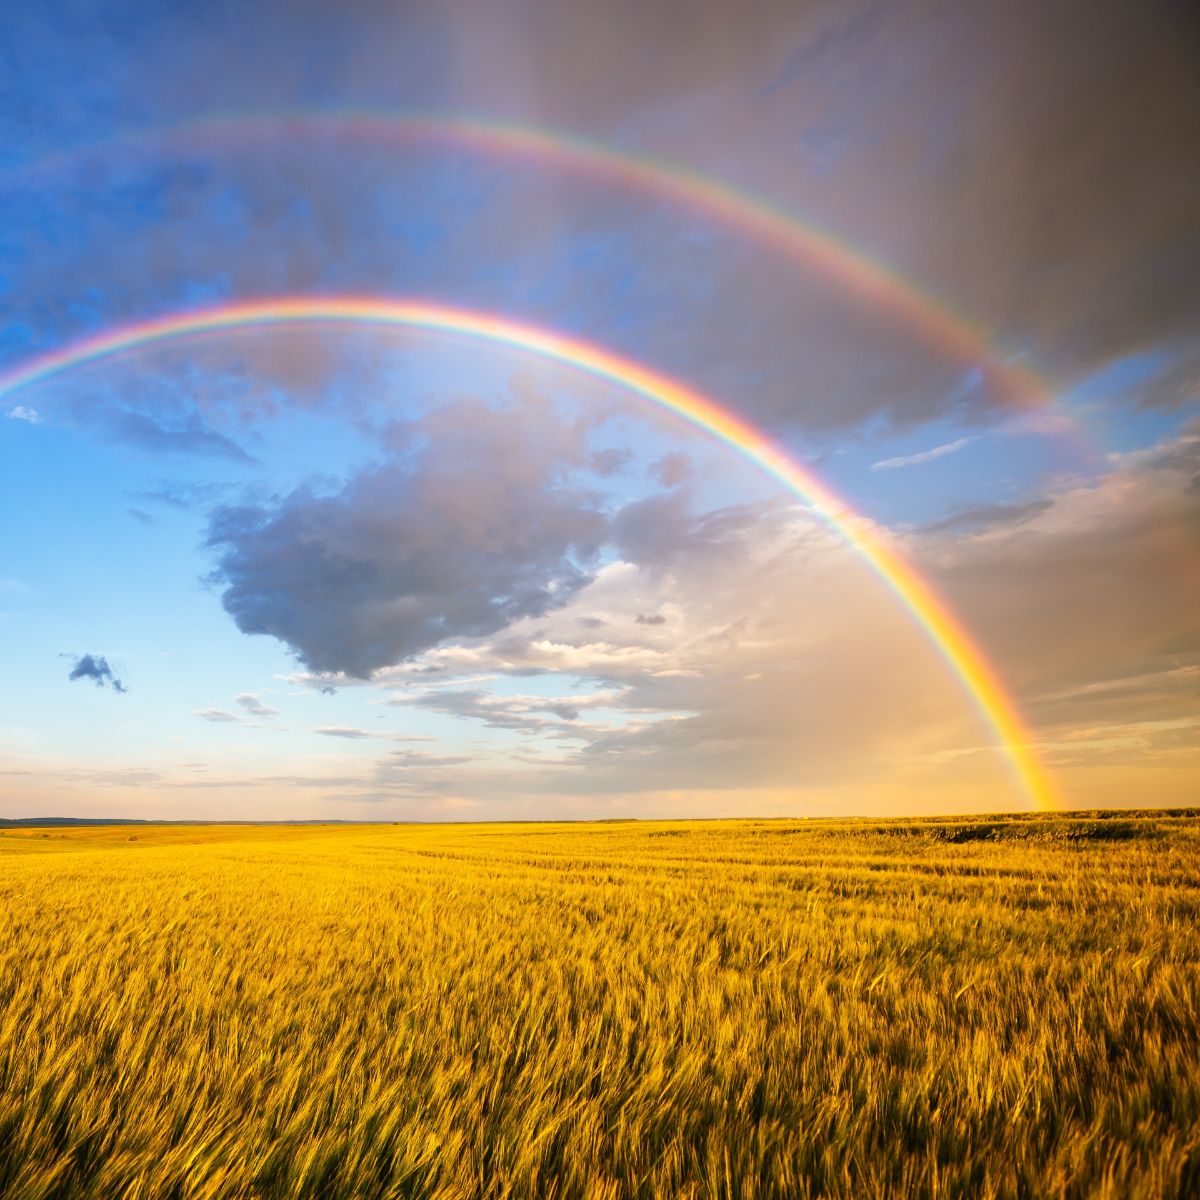 What is the spiritual meaning of a double rainbow